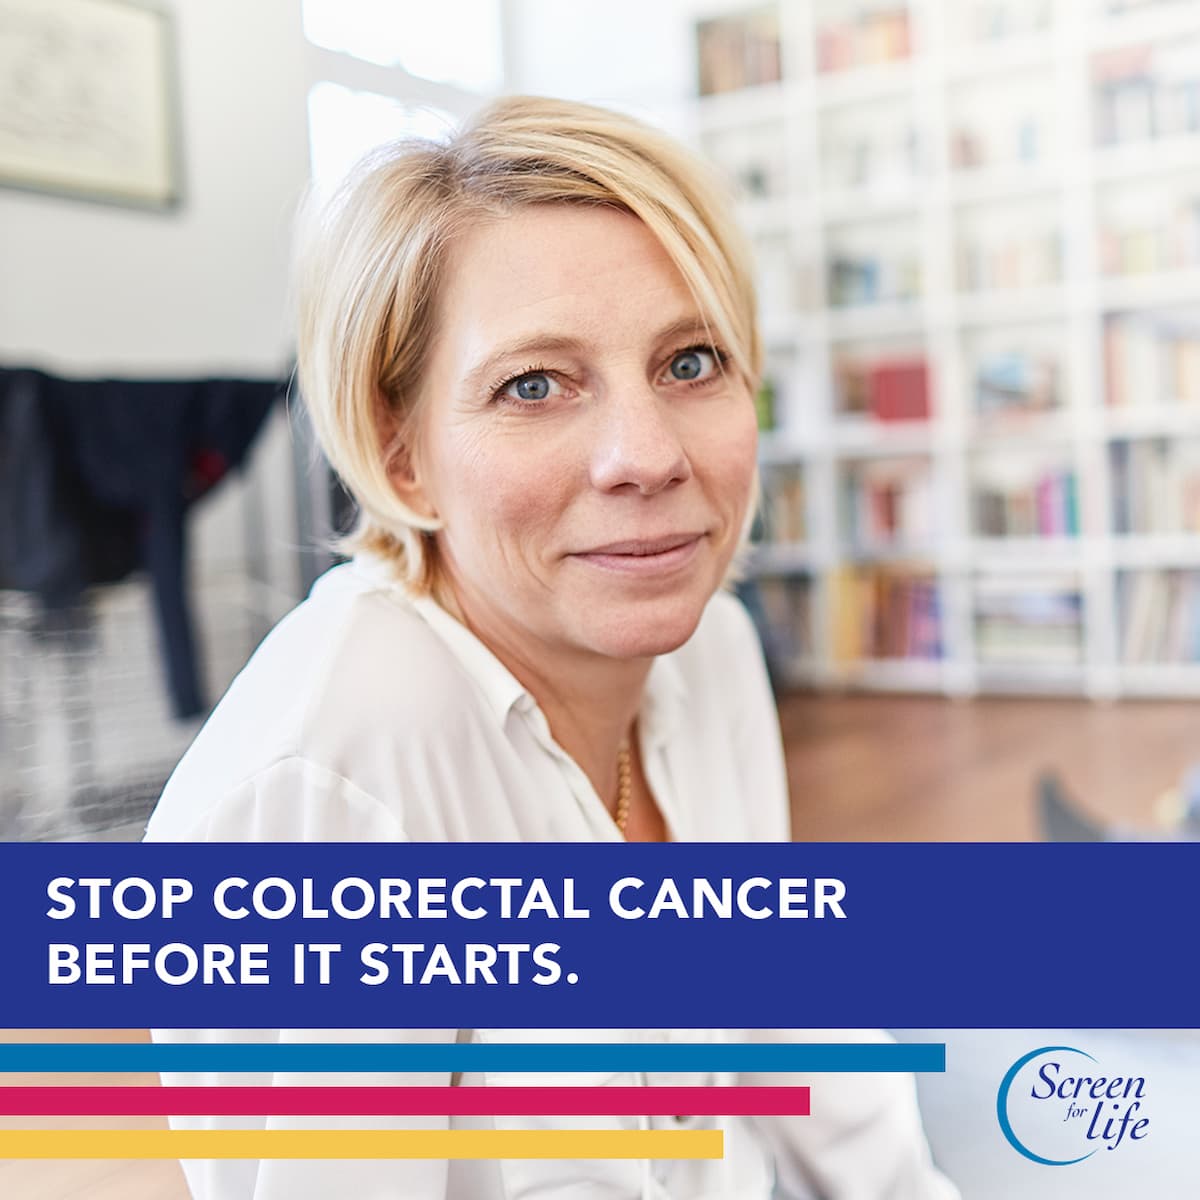 Stop colorectal cancer before it starts.